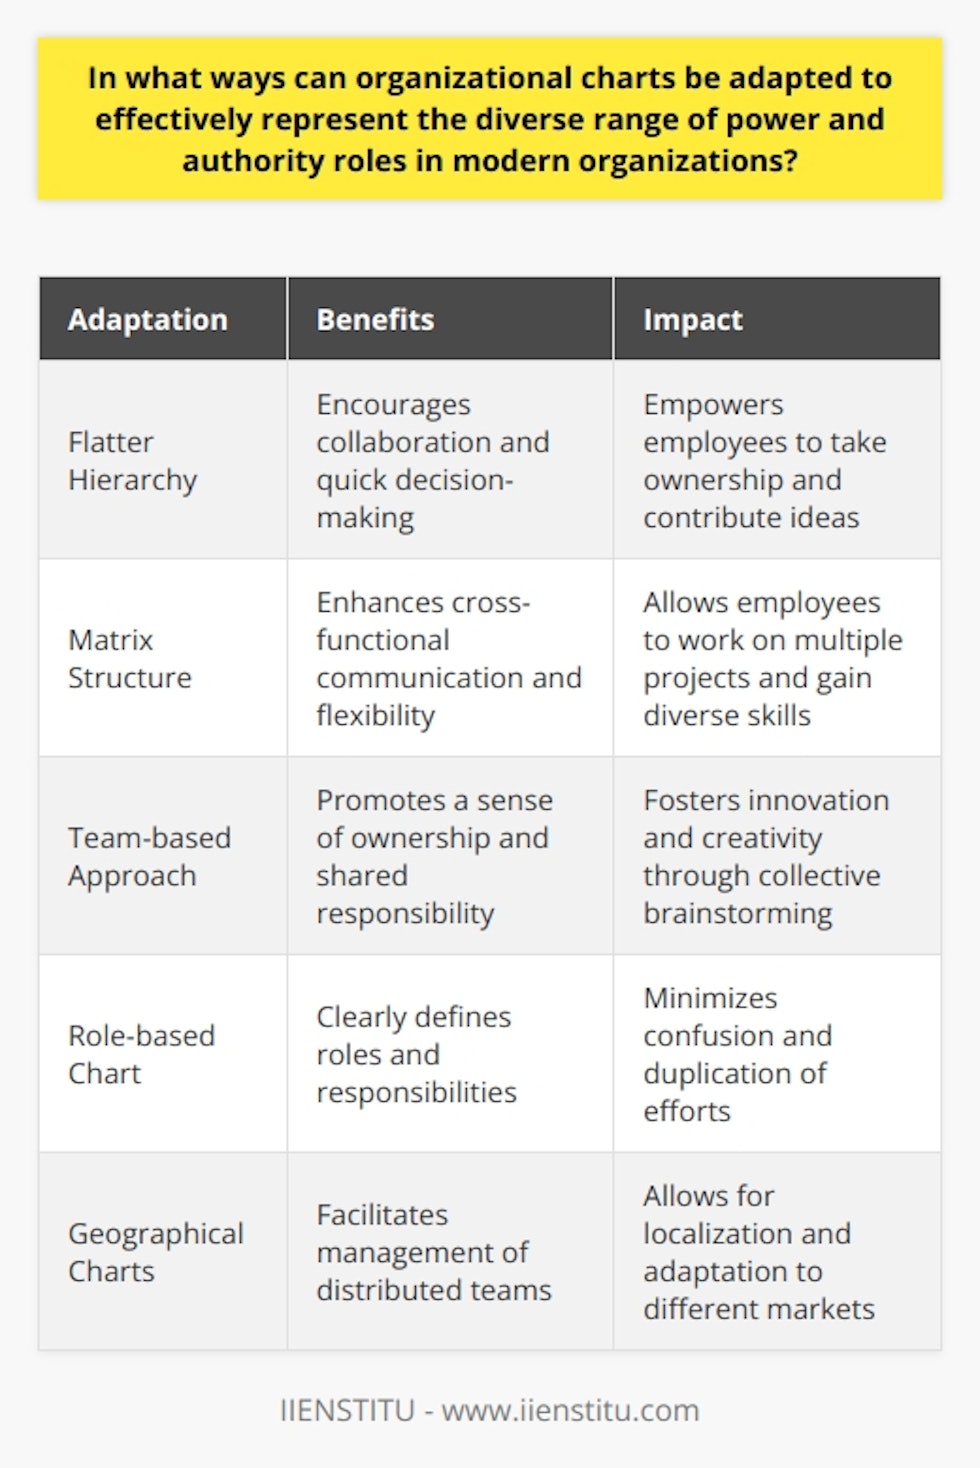 These adaptations not only facilitate collaboration and decision-making but also empower employees at all levels, ultimately contributing to the success and growth of the organization. IIENSTITU recognizes the importance of these flexible approaches in organizational chart design and encourages organizations to embrace them to create a more inclusive and effective team structure. By doing so, organizations can foster a culture of transparency, empowerment, and innovation that drives their success in a rapidly evolving business landscape.